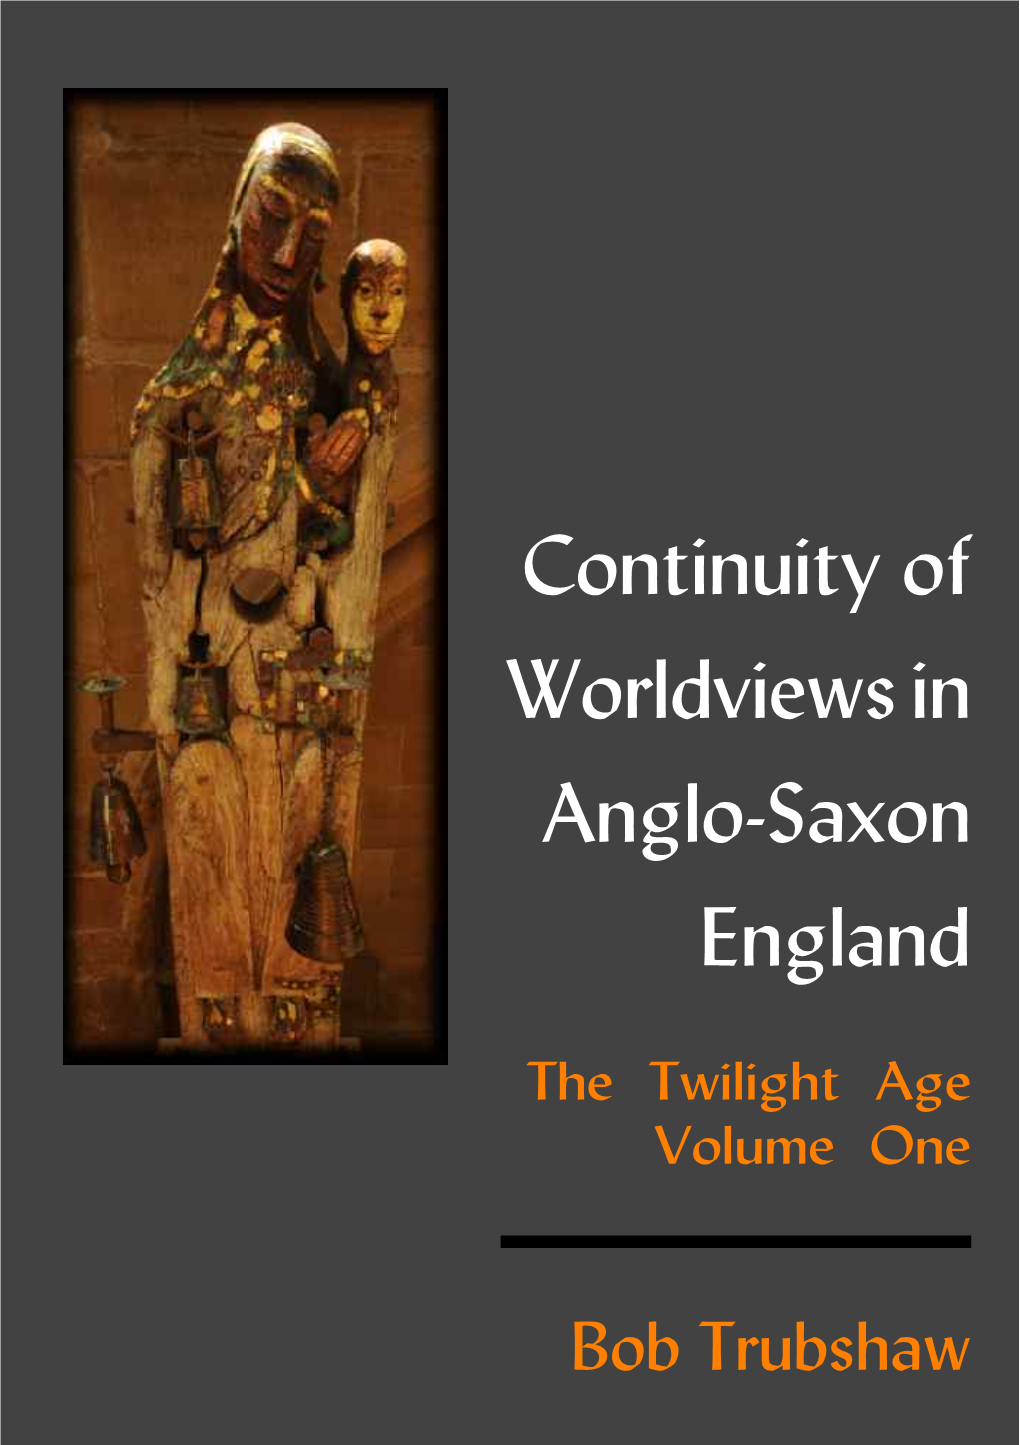 Continuity of Worldviews in Anglo-Saxon England